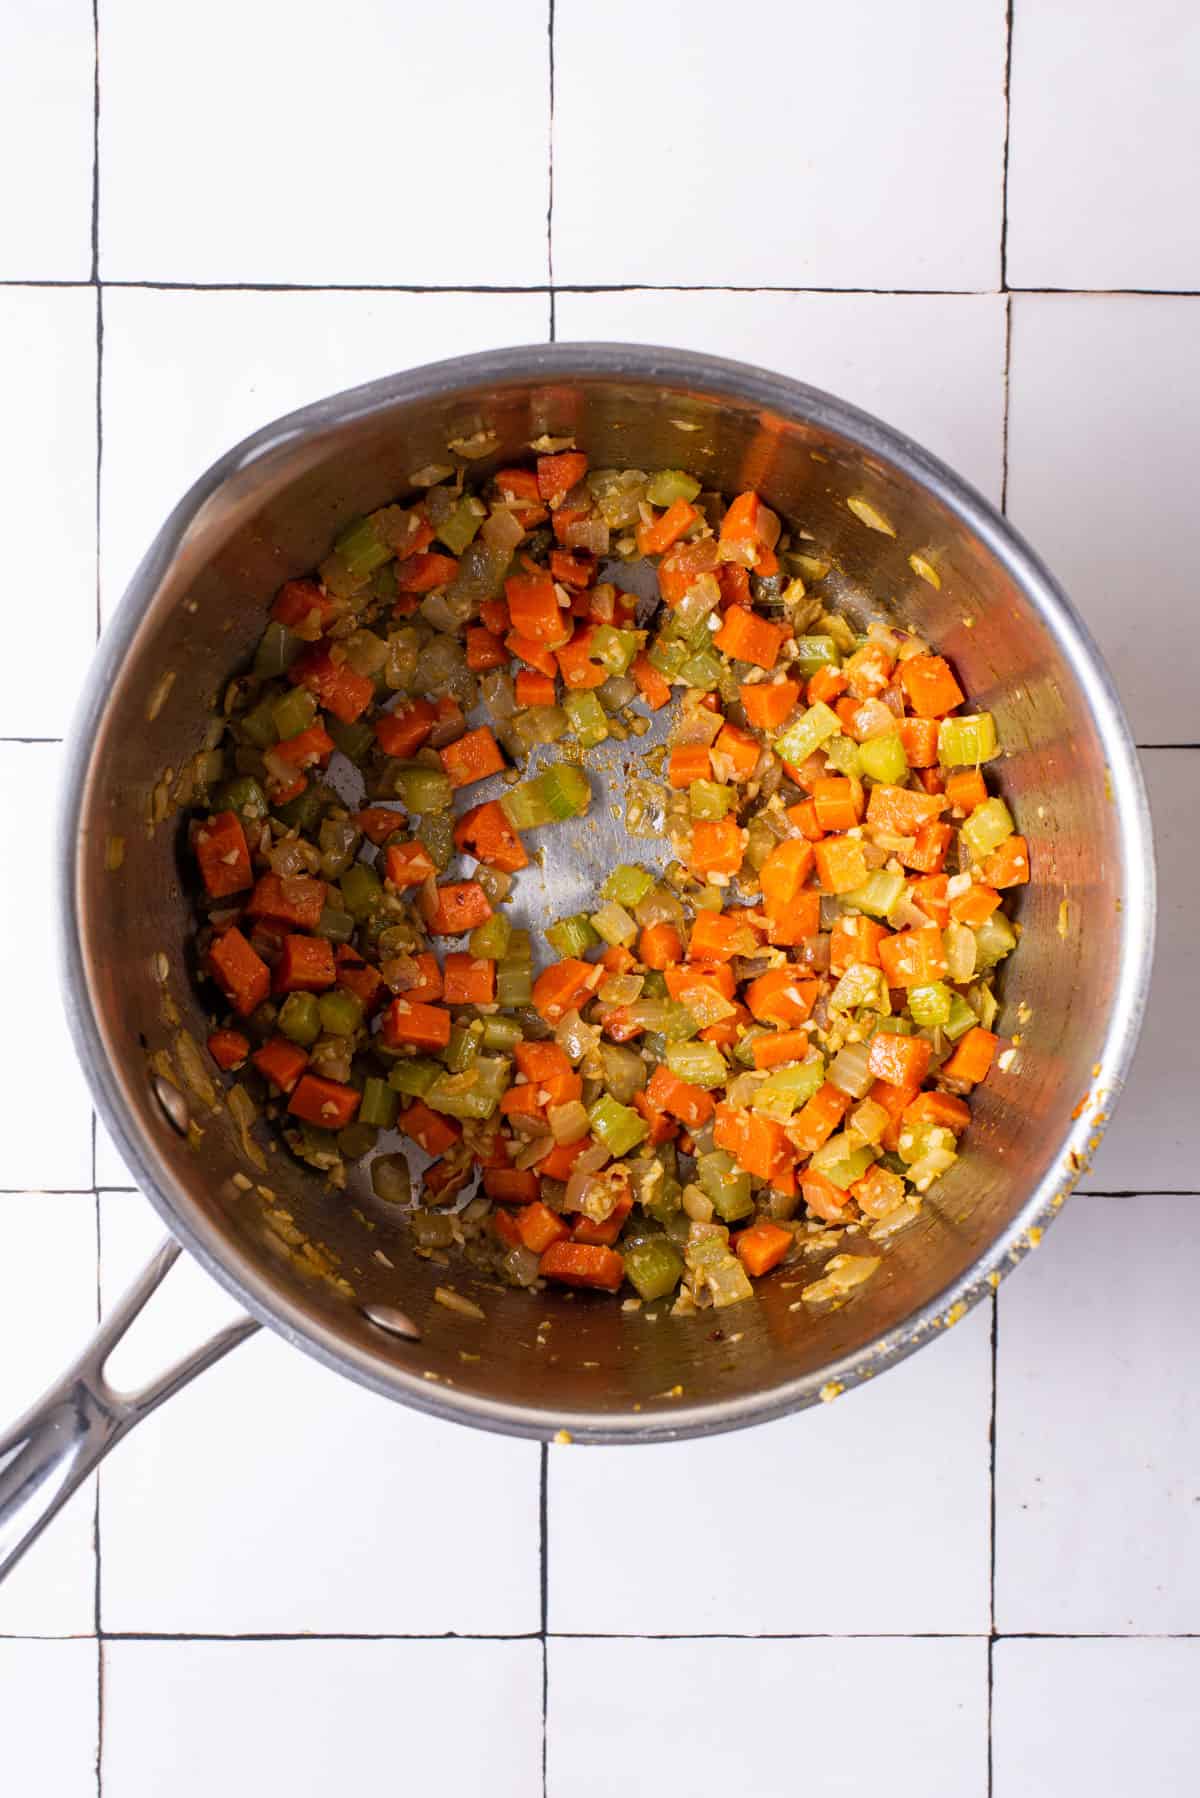 Cooked mirepoix in a pot.